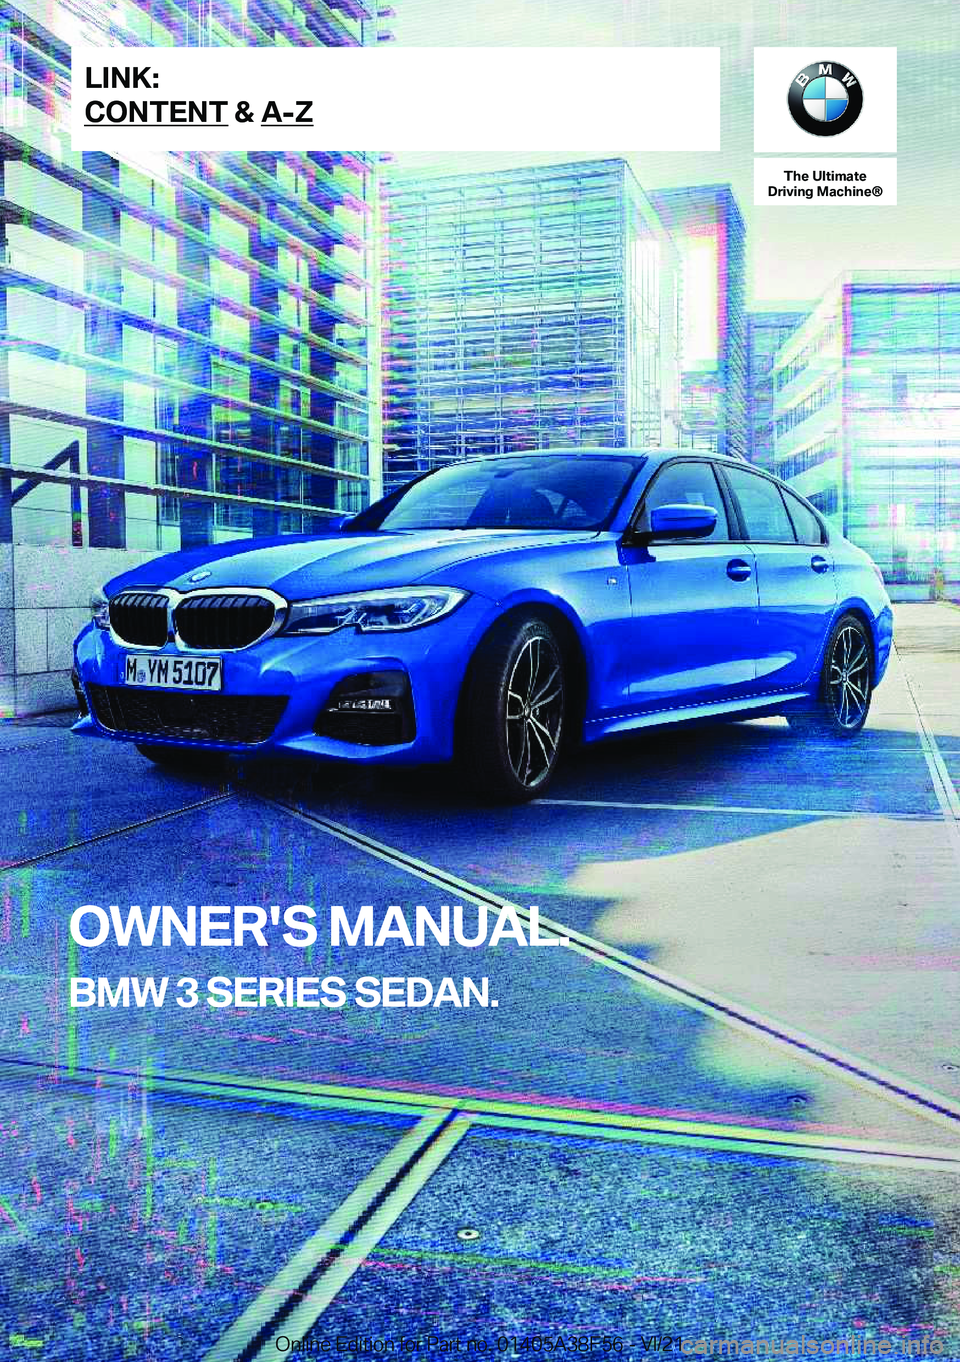 BMW 3 SERIES 2022  Owners Manual �T�h�e��U�l�t�i�m�a�t�e
�D�r�i�v�i�n�g��M�a�c�h�i�n�e�n
�O�W�N�E�R�'�S��M�A�N�U�A�L�.
�B�M�W��3��S�E�R�I�E�S��S�E�D�A�N�.�L�I�N�K�:
�C�O�N�T�E�N�T��&��A�-�Z�O�n�l�i�n�e��E�d�i�t�i�o�n��f